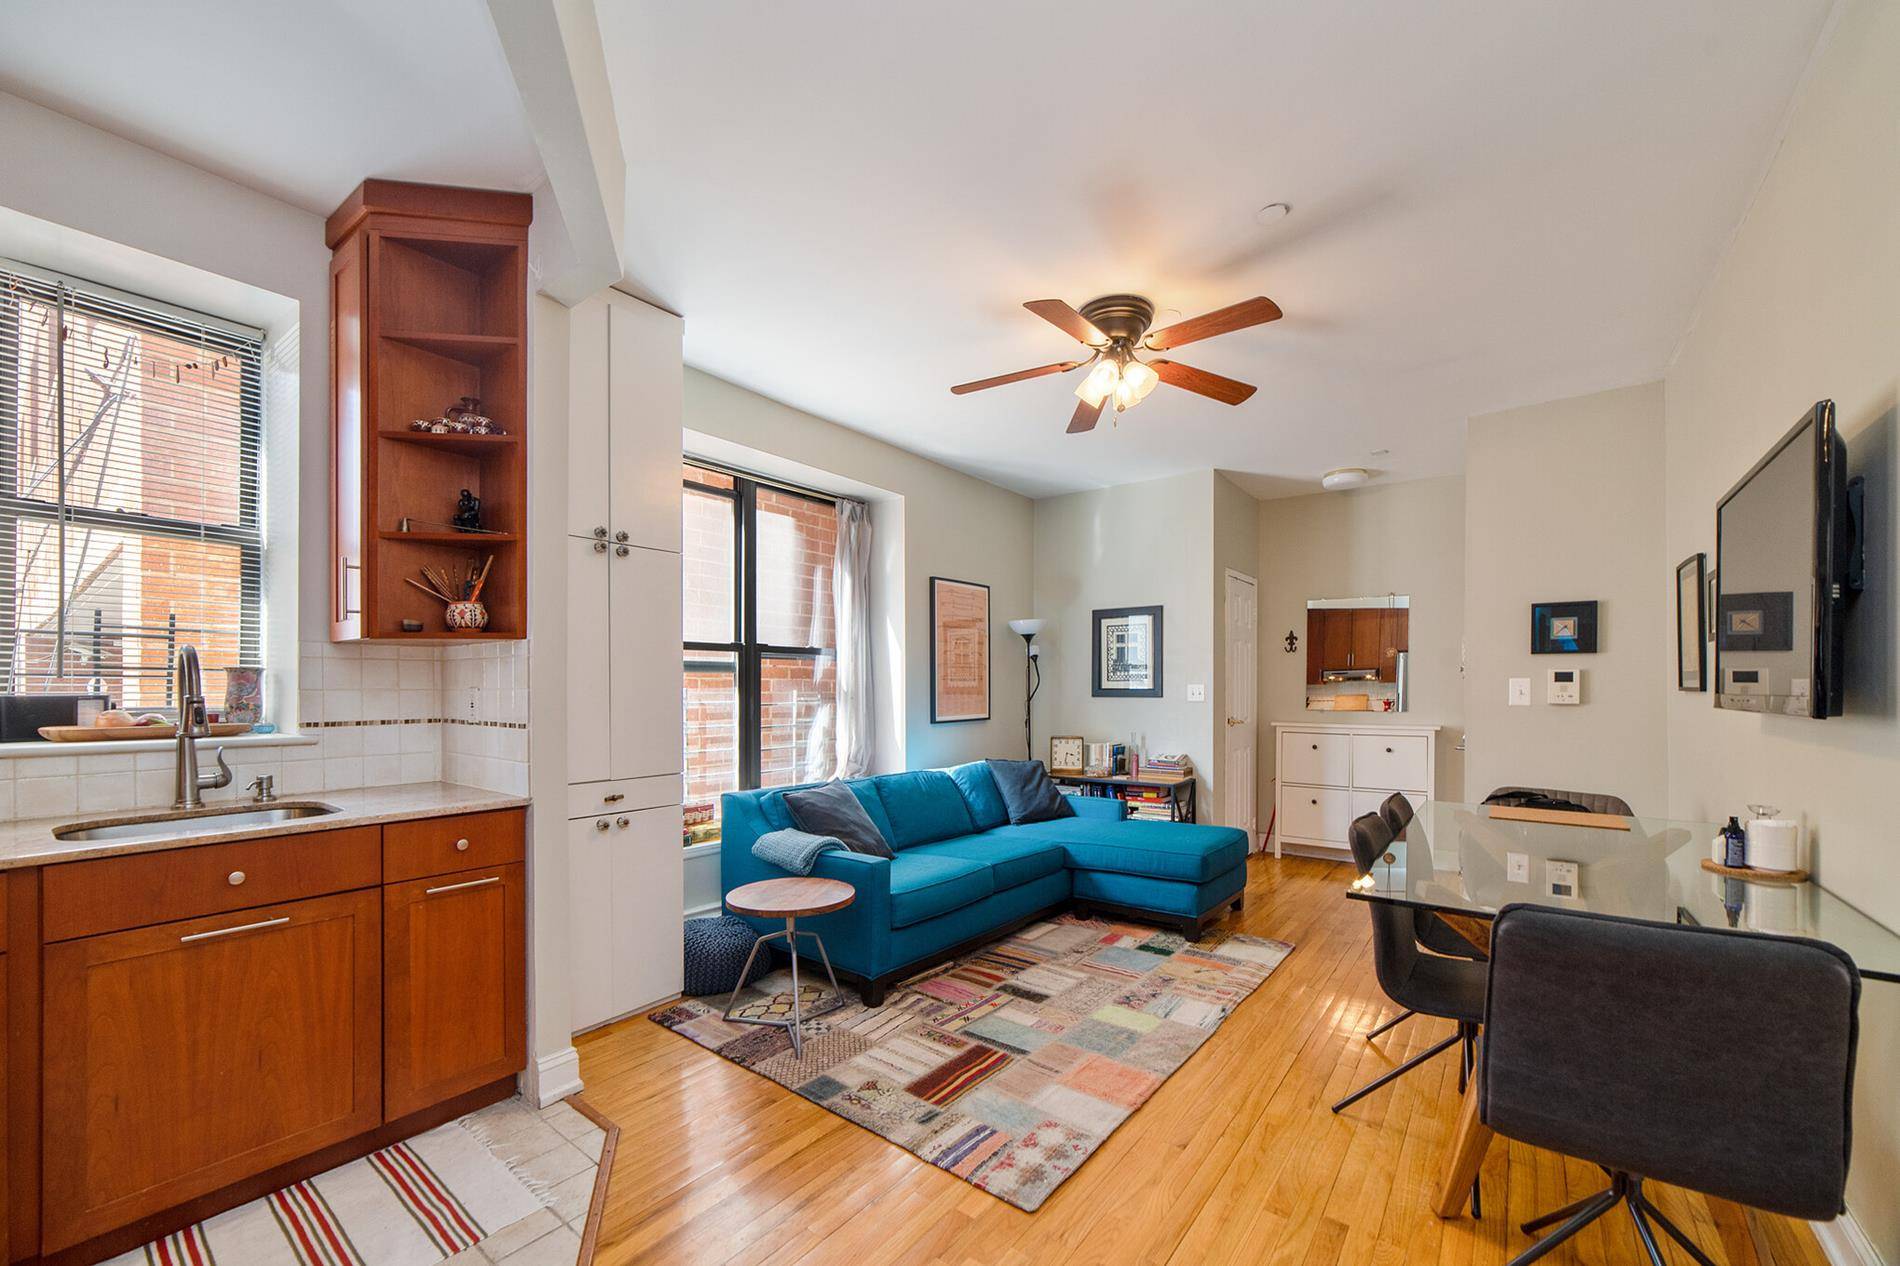 One Bedroom 1 Bath with open layout on the first floor of a 5 story South Harlem HDFC Townhouse.